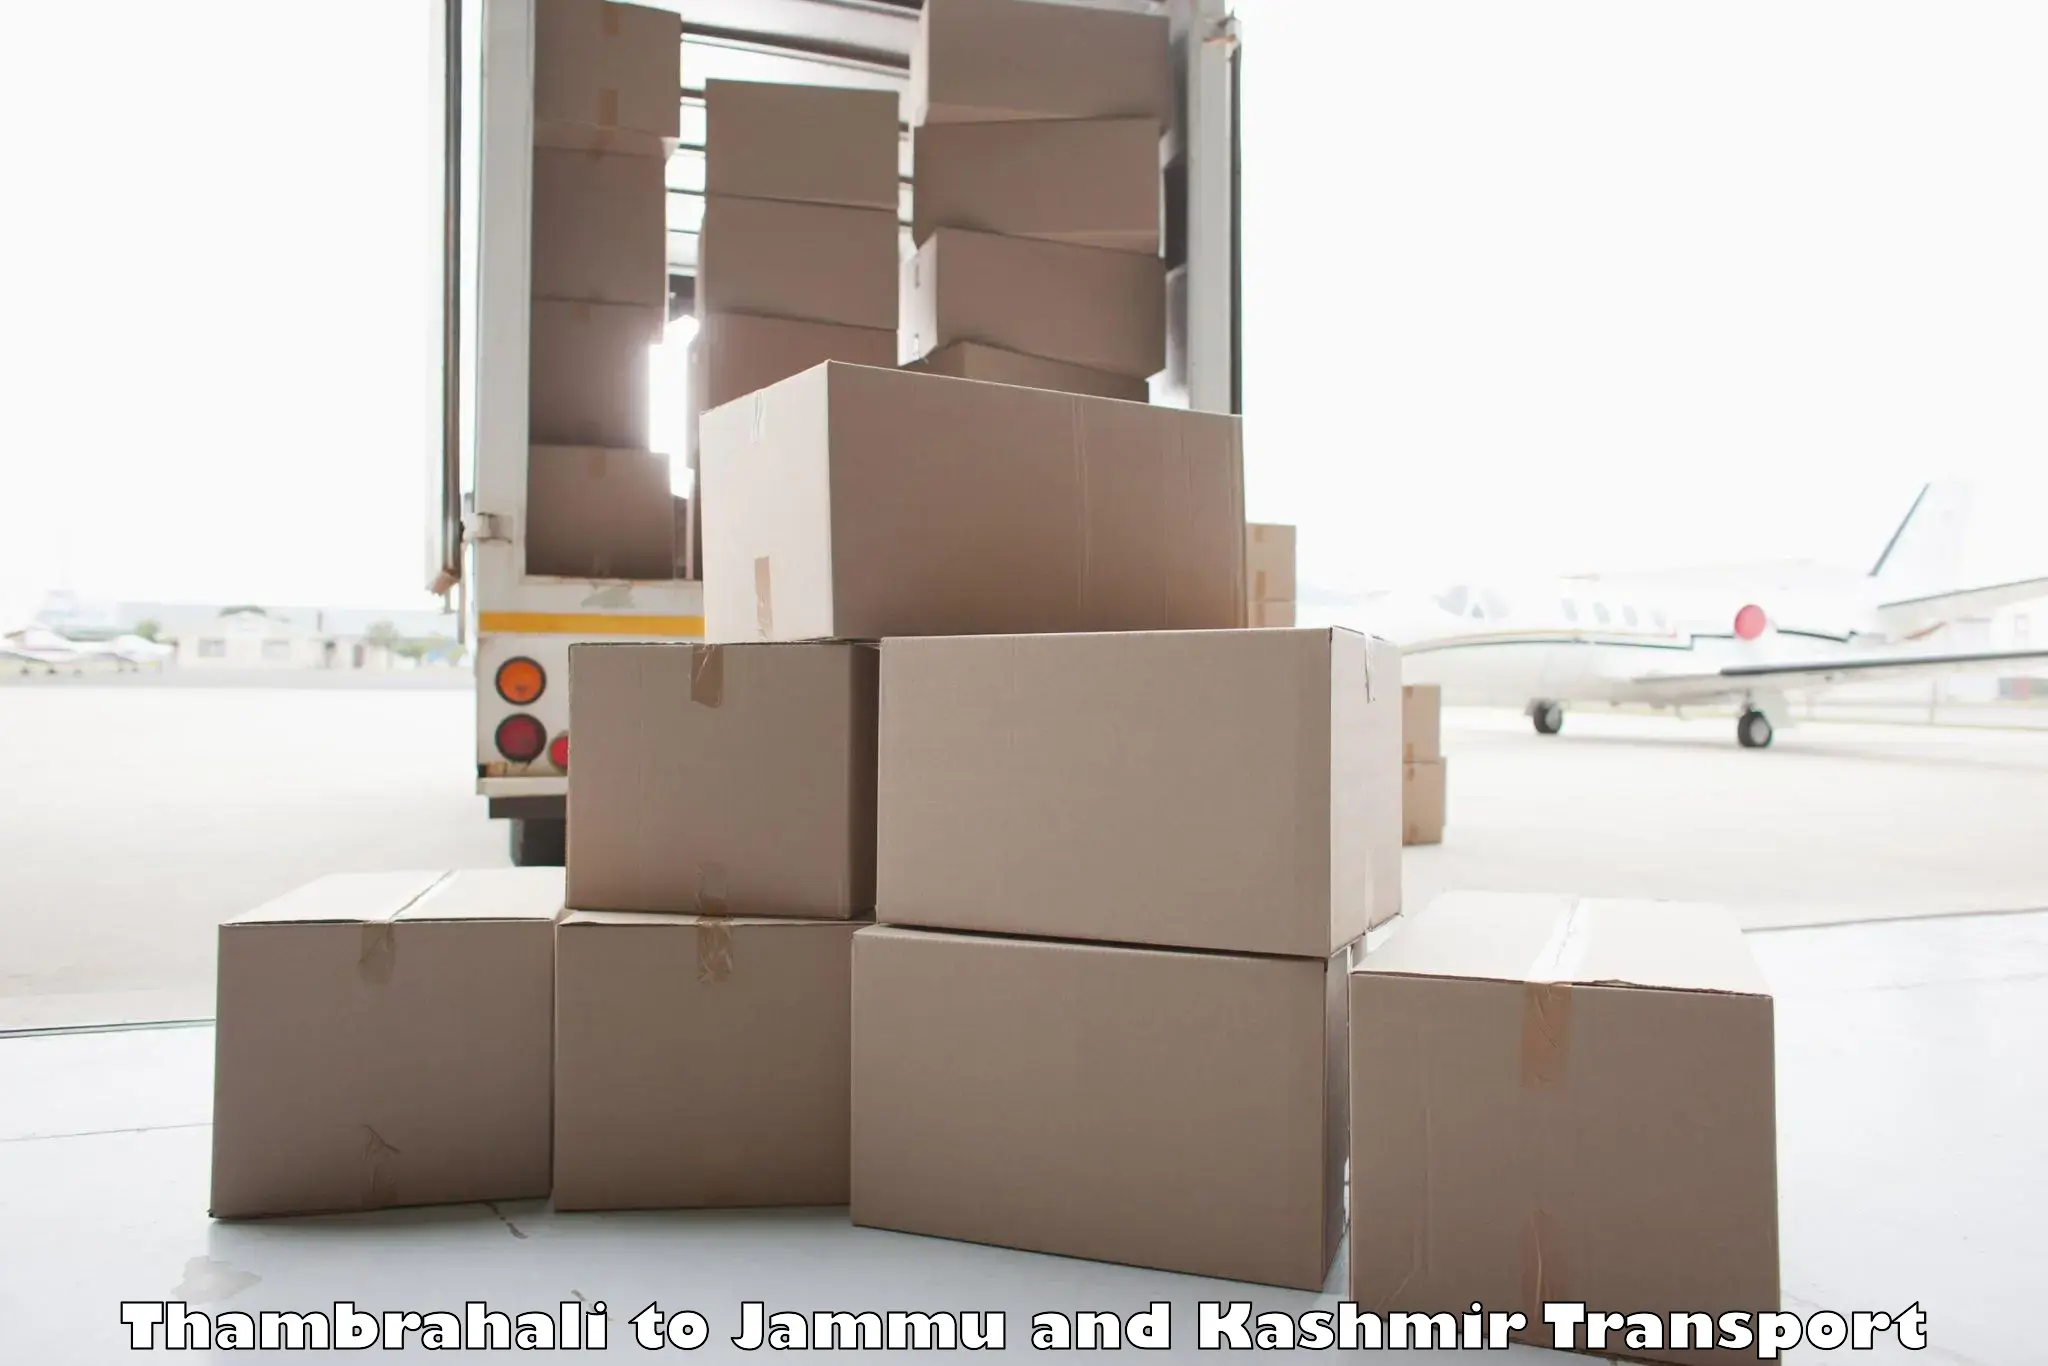 Parcel transport services Thambrahali to Poonch